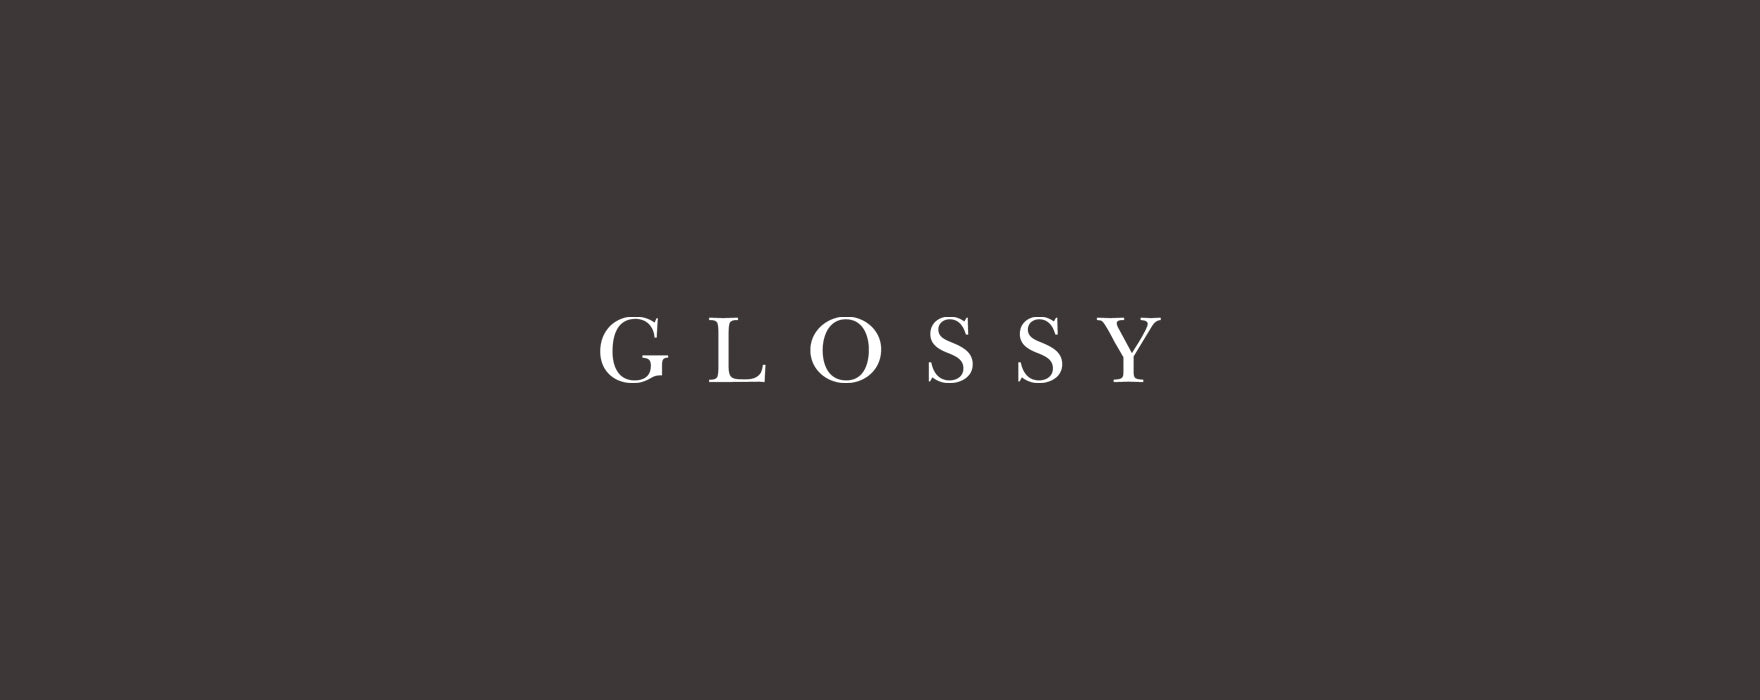 Glossy: Lab Grown Companies Tout Ethical, Sustainable Gems